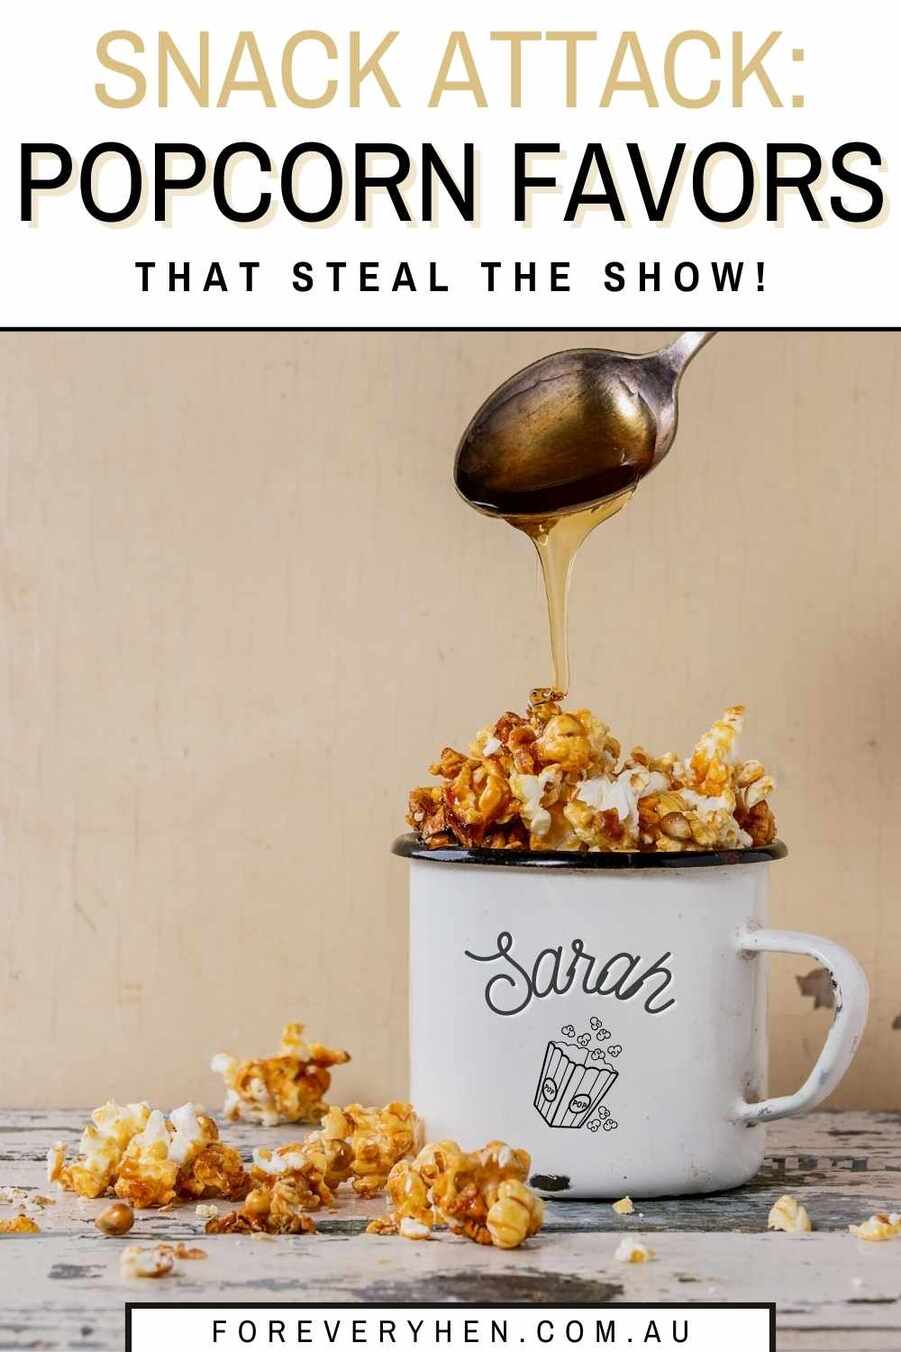 Image of popcorn in a mug, with a spoon drizzling honey on top of it. Text overlay: snack attack - popcorn favors that steal the show!